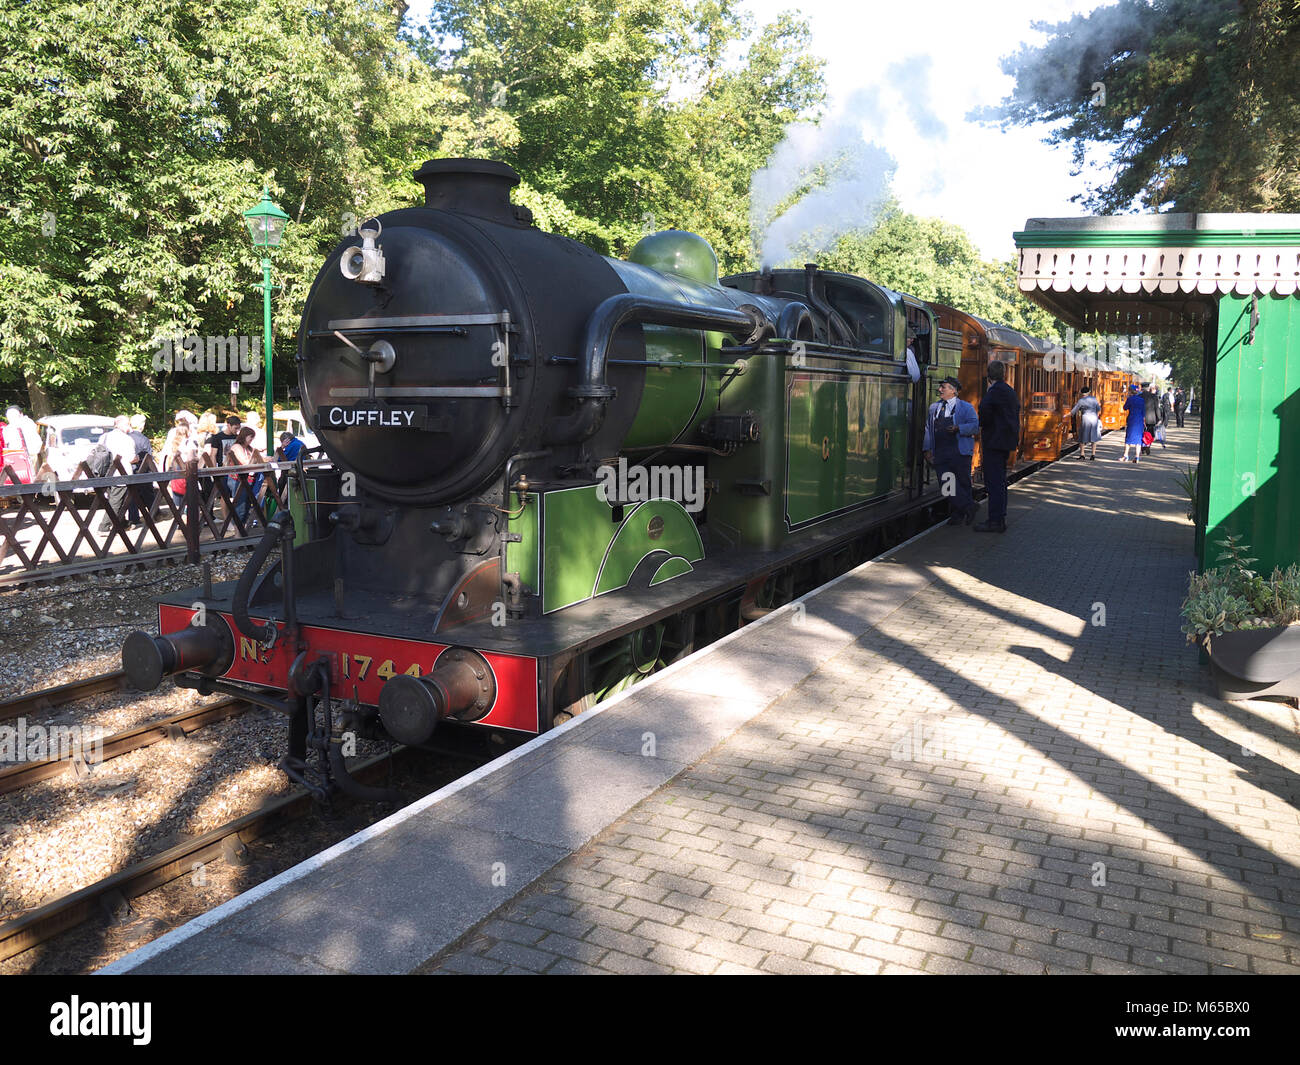 LNER loco 1744 Cuffley at Holt on the North Norfolk railway Stock Photo